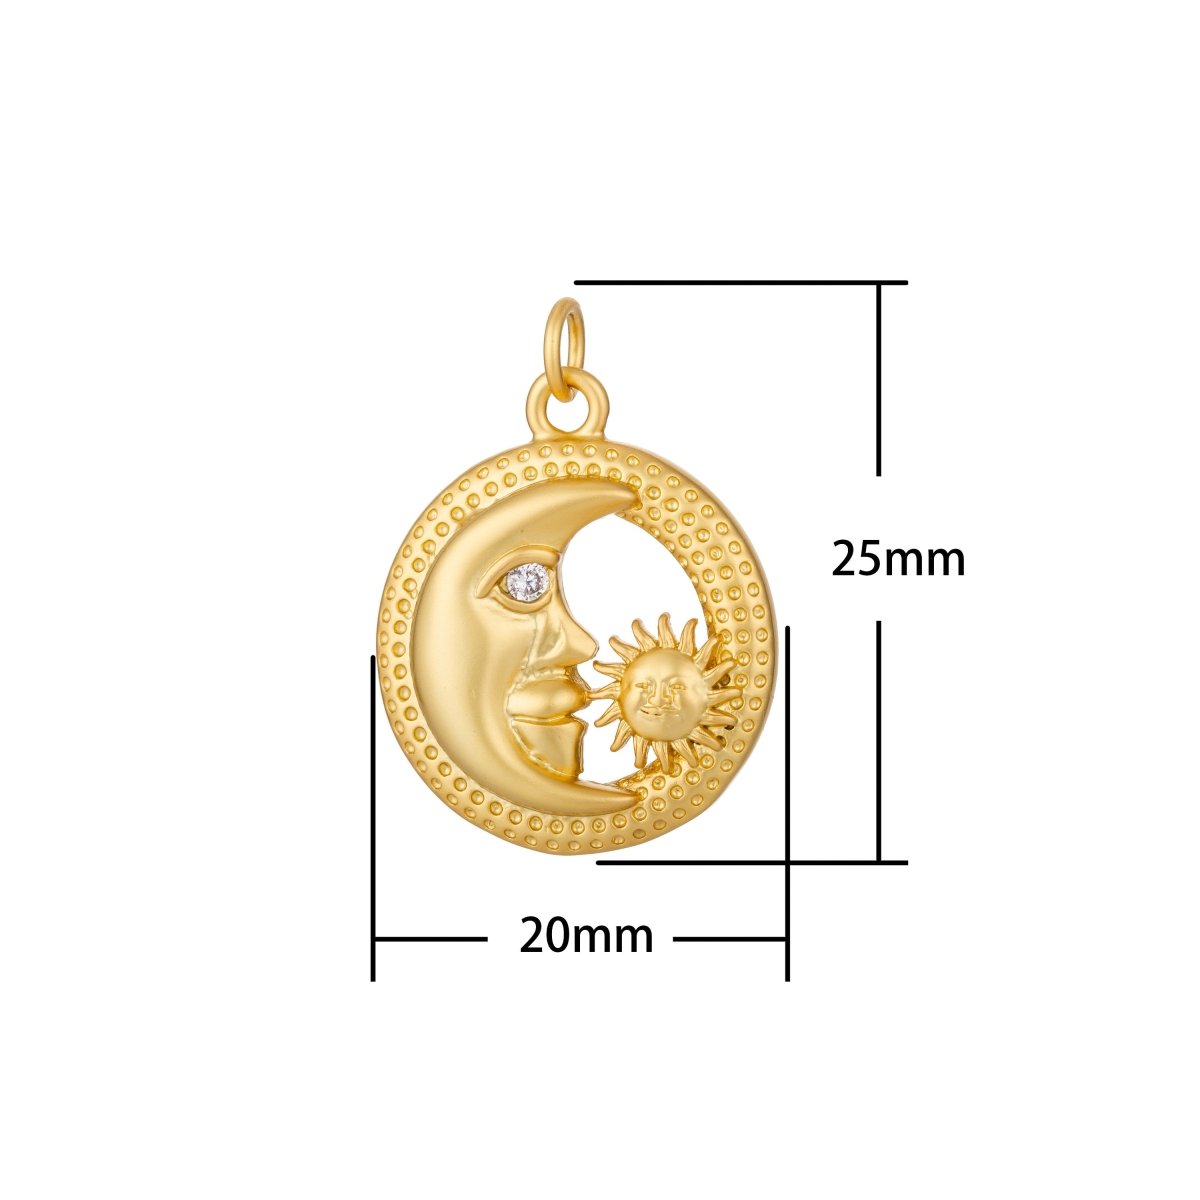 Sun charms, sun and moon Pendant Gold Filled Moon Sun Pendant, Gold Pendant, Dainty Pendant, Celestial Charm Pendant, round pendant, 20mm C-367 - DLUXCA